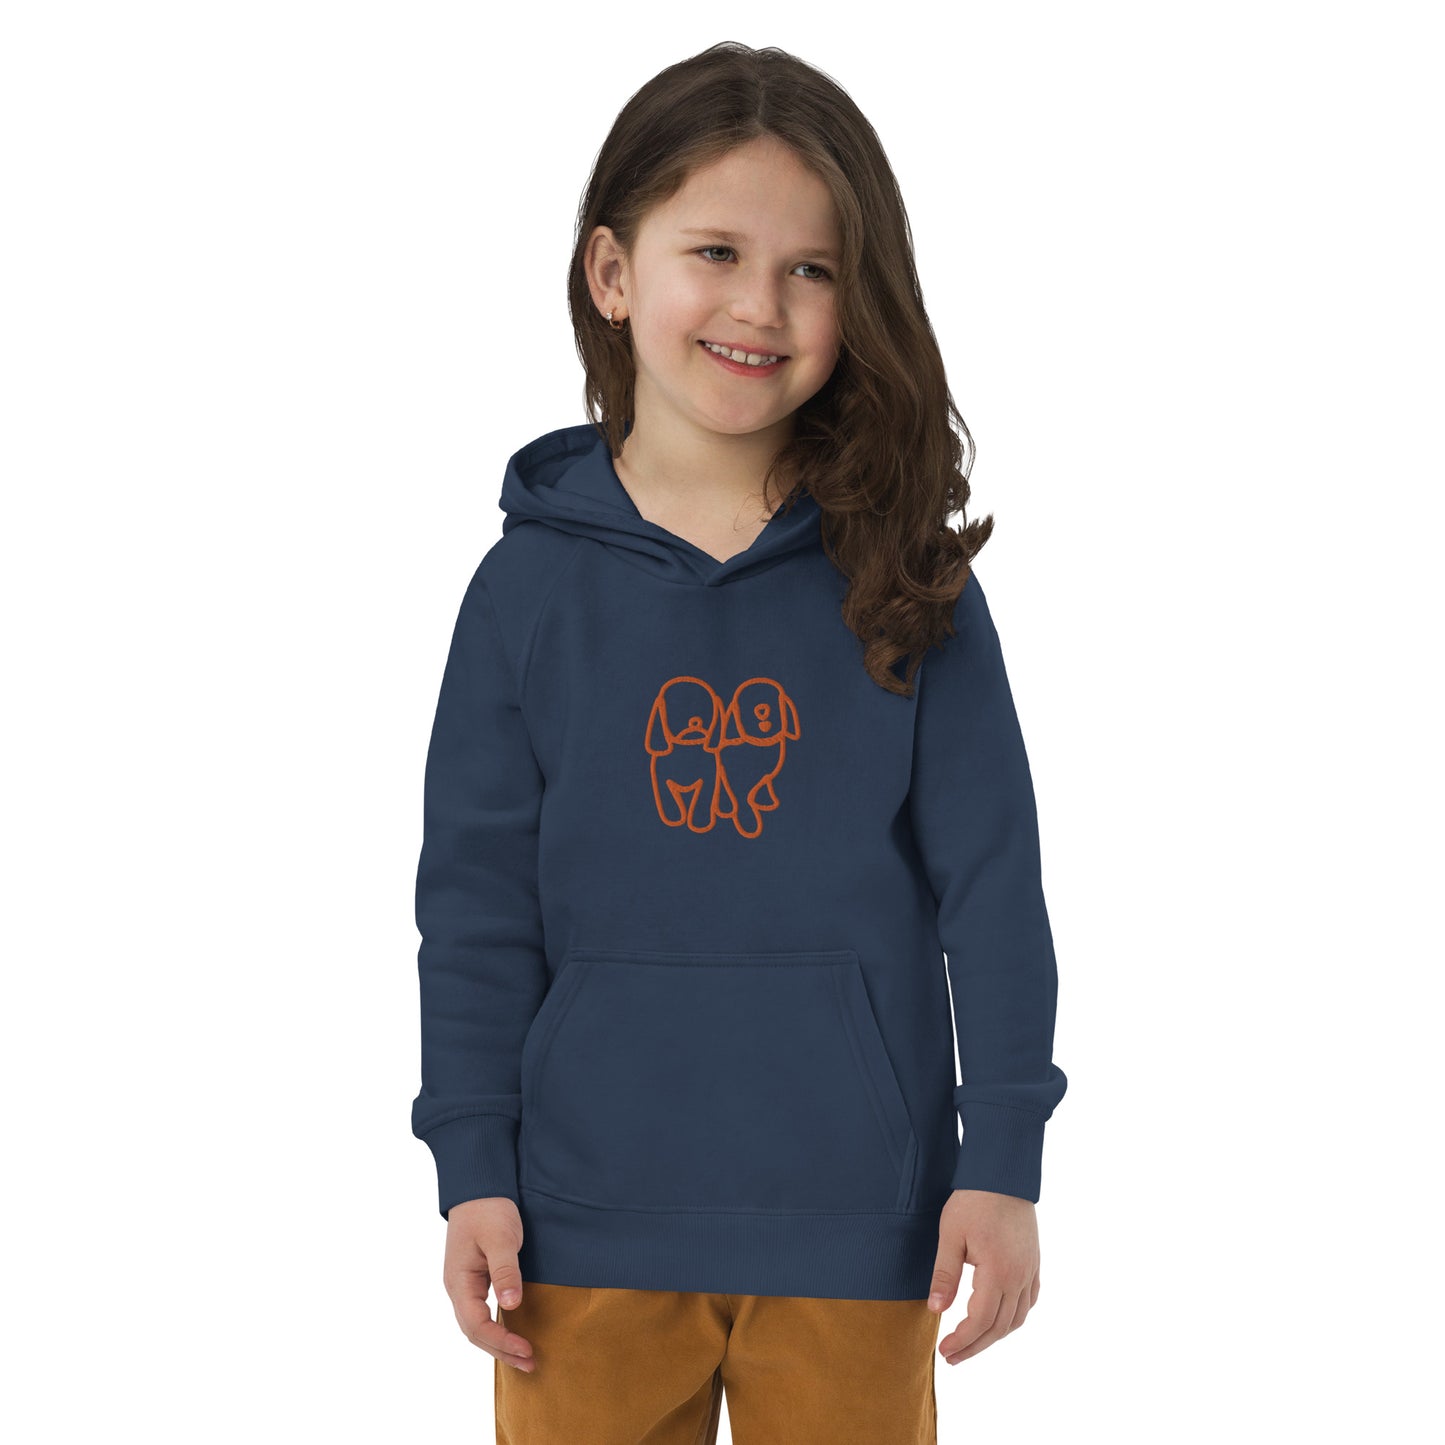 Kids unisex eco hoodie Nvy/Ong